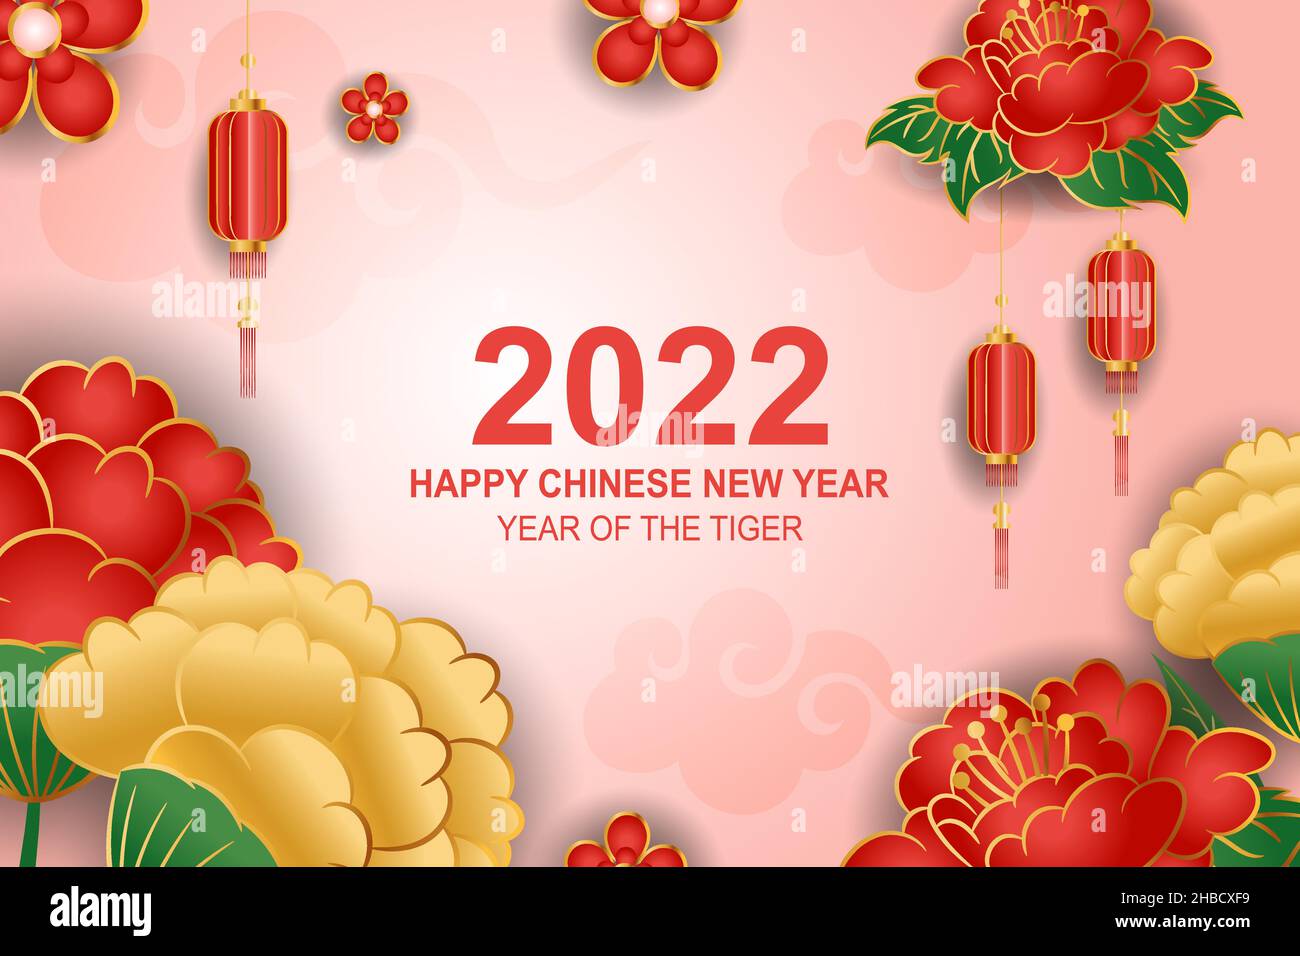 Chinese new year celebration festive background with red and golden floral ornament Stock Vector